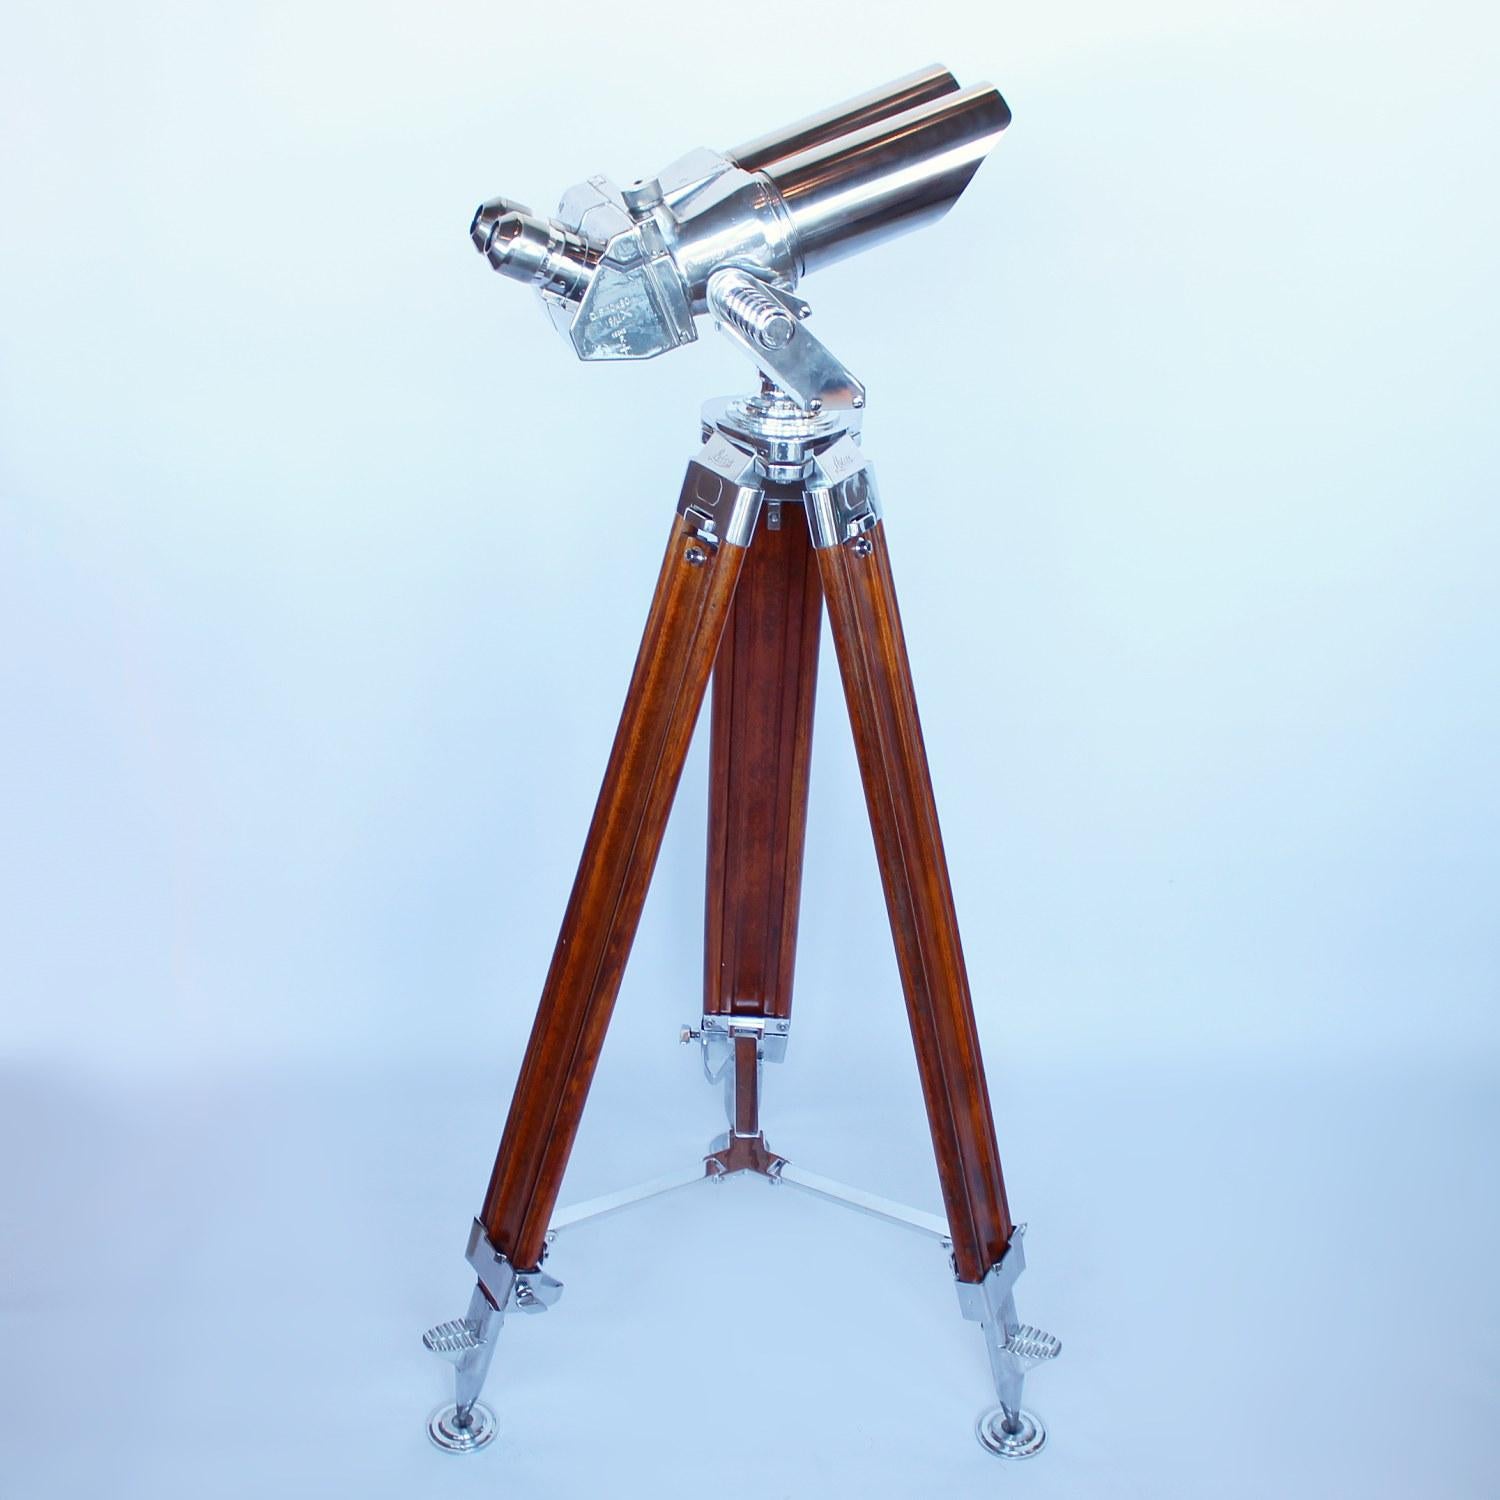 A pair of 10 x 80 binoculars with eyeglasses set at 45 degrees, attributed to Zeiss. Set on period, extending oak and metal Leica stand with chromed, conical feet. 10 times magnification with 80mm objective lens.
Paint stripped and metal polished.